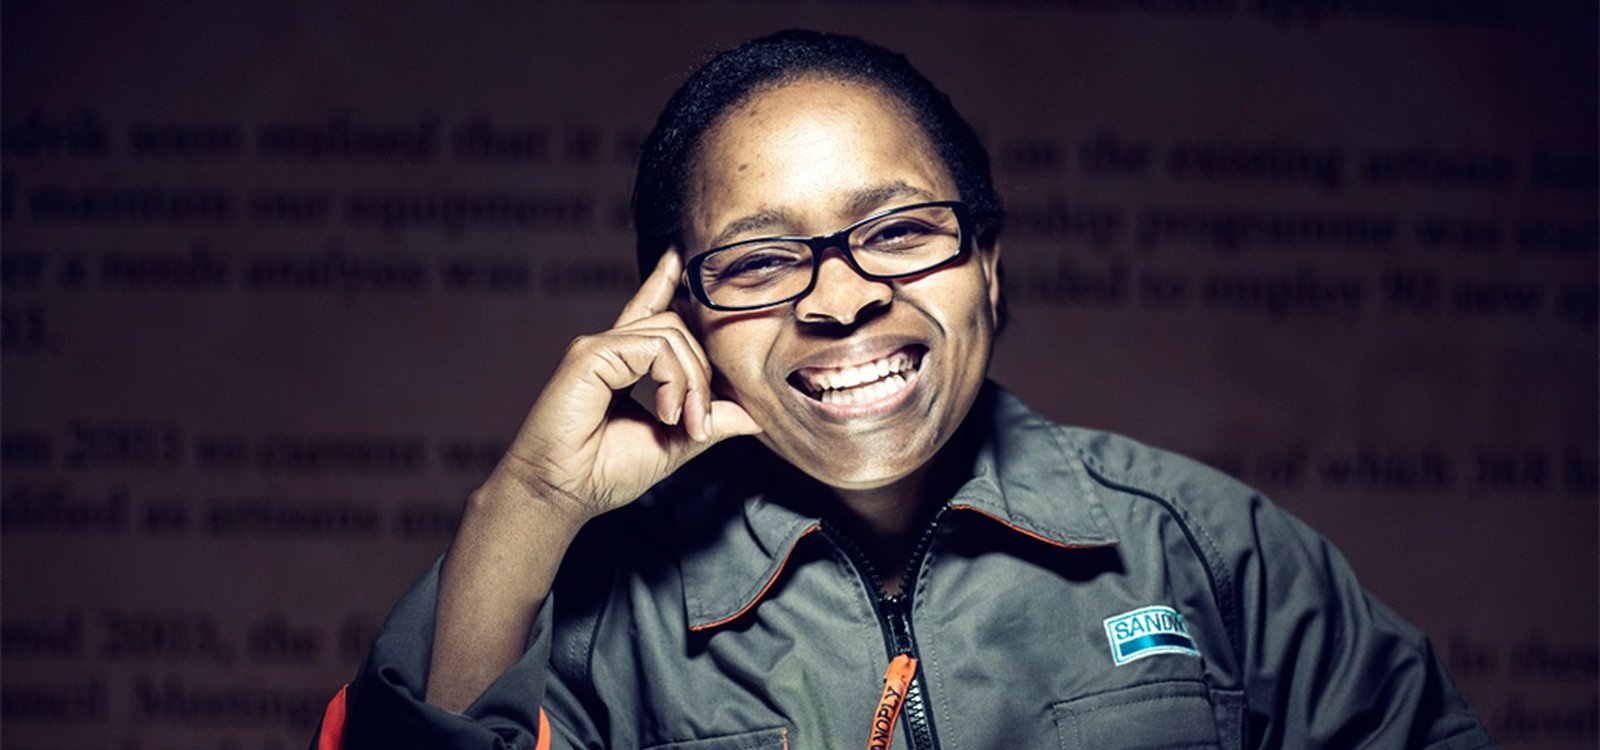 Millecent Mahola is one of 10 women who are currently enrolled in the programme.